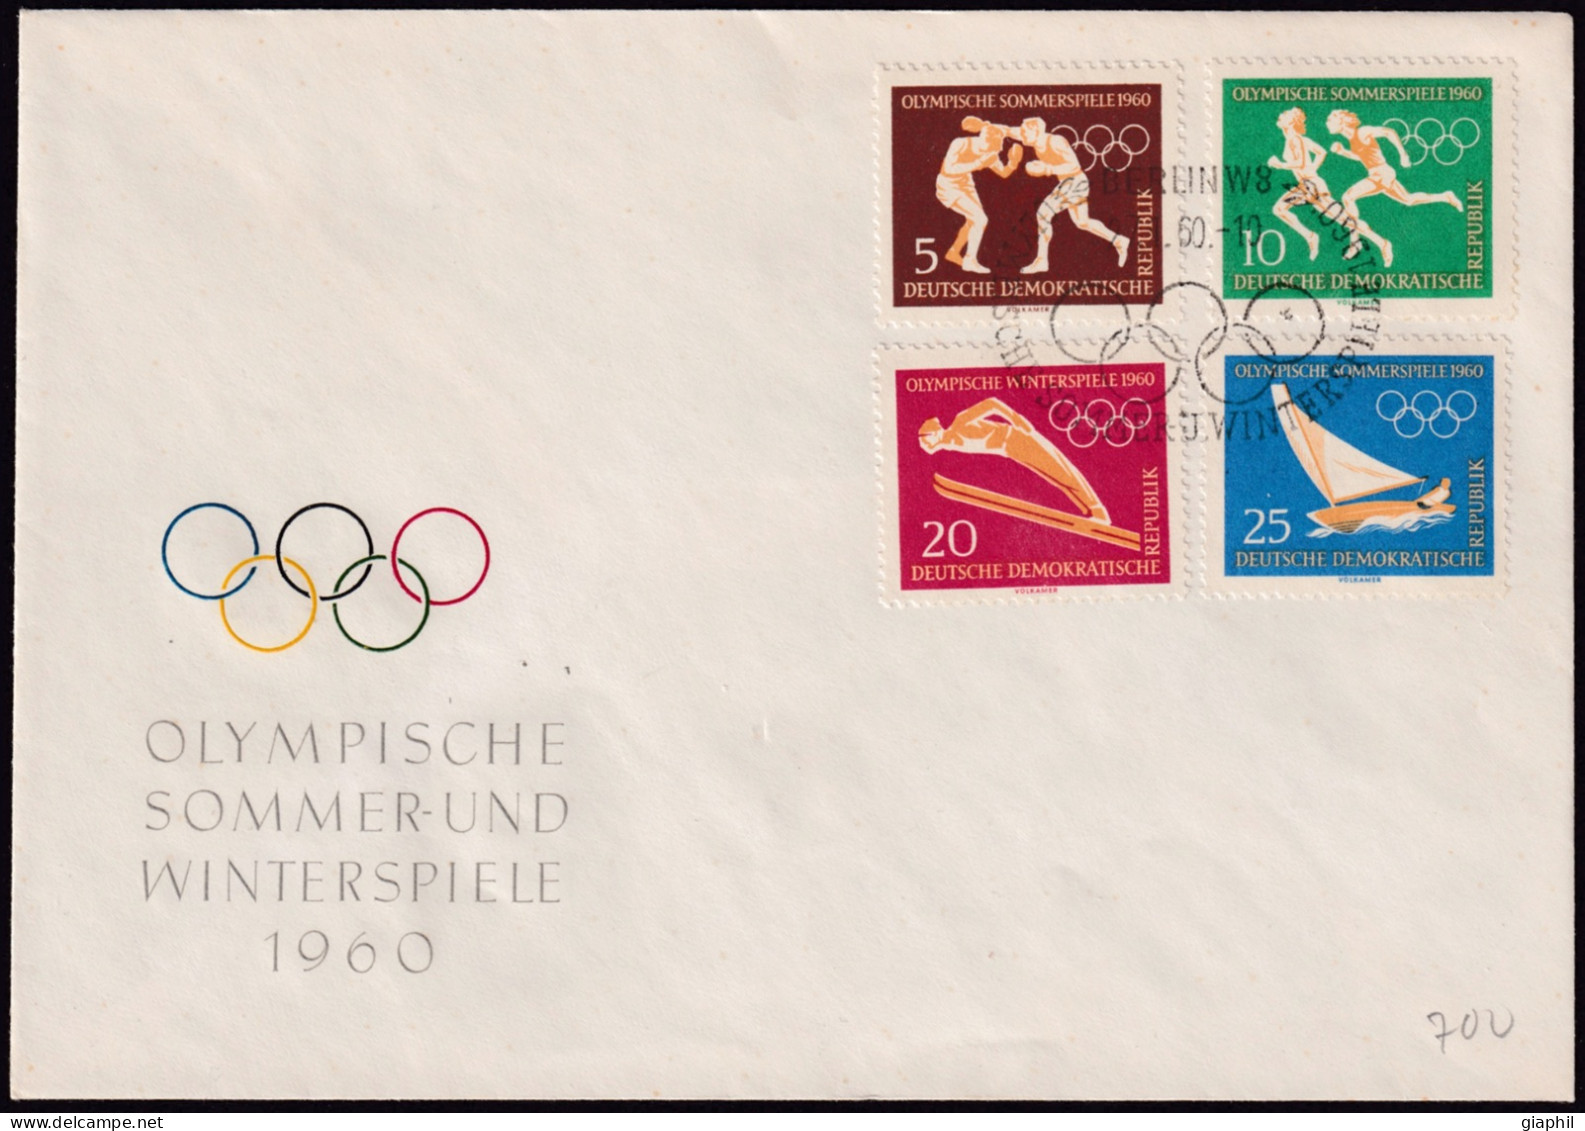 GERMANY EAST - DDR 1960 FDC ROME OLYMPIC GAMES (Mi. 746-749)  OFFER! - Zomer 1960: Rome